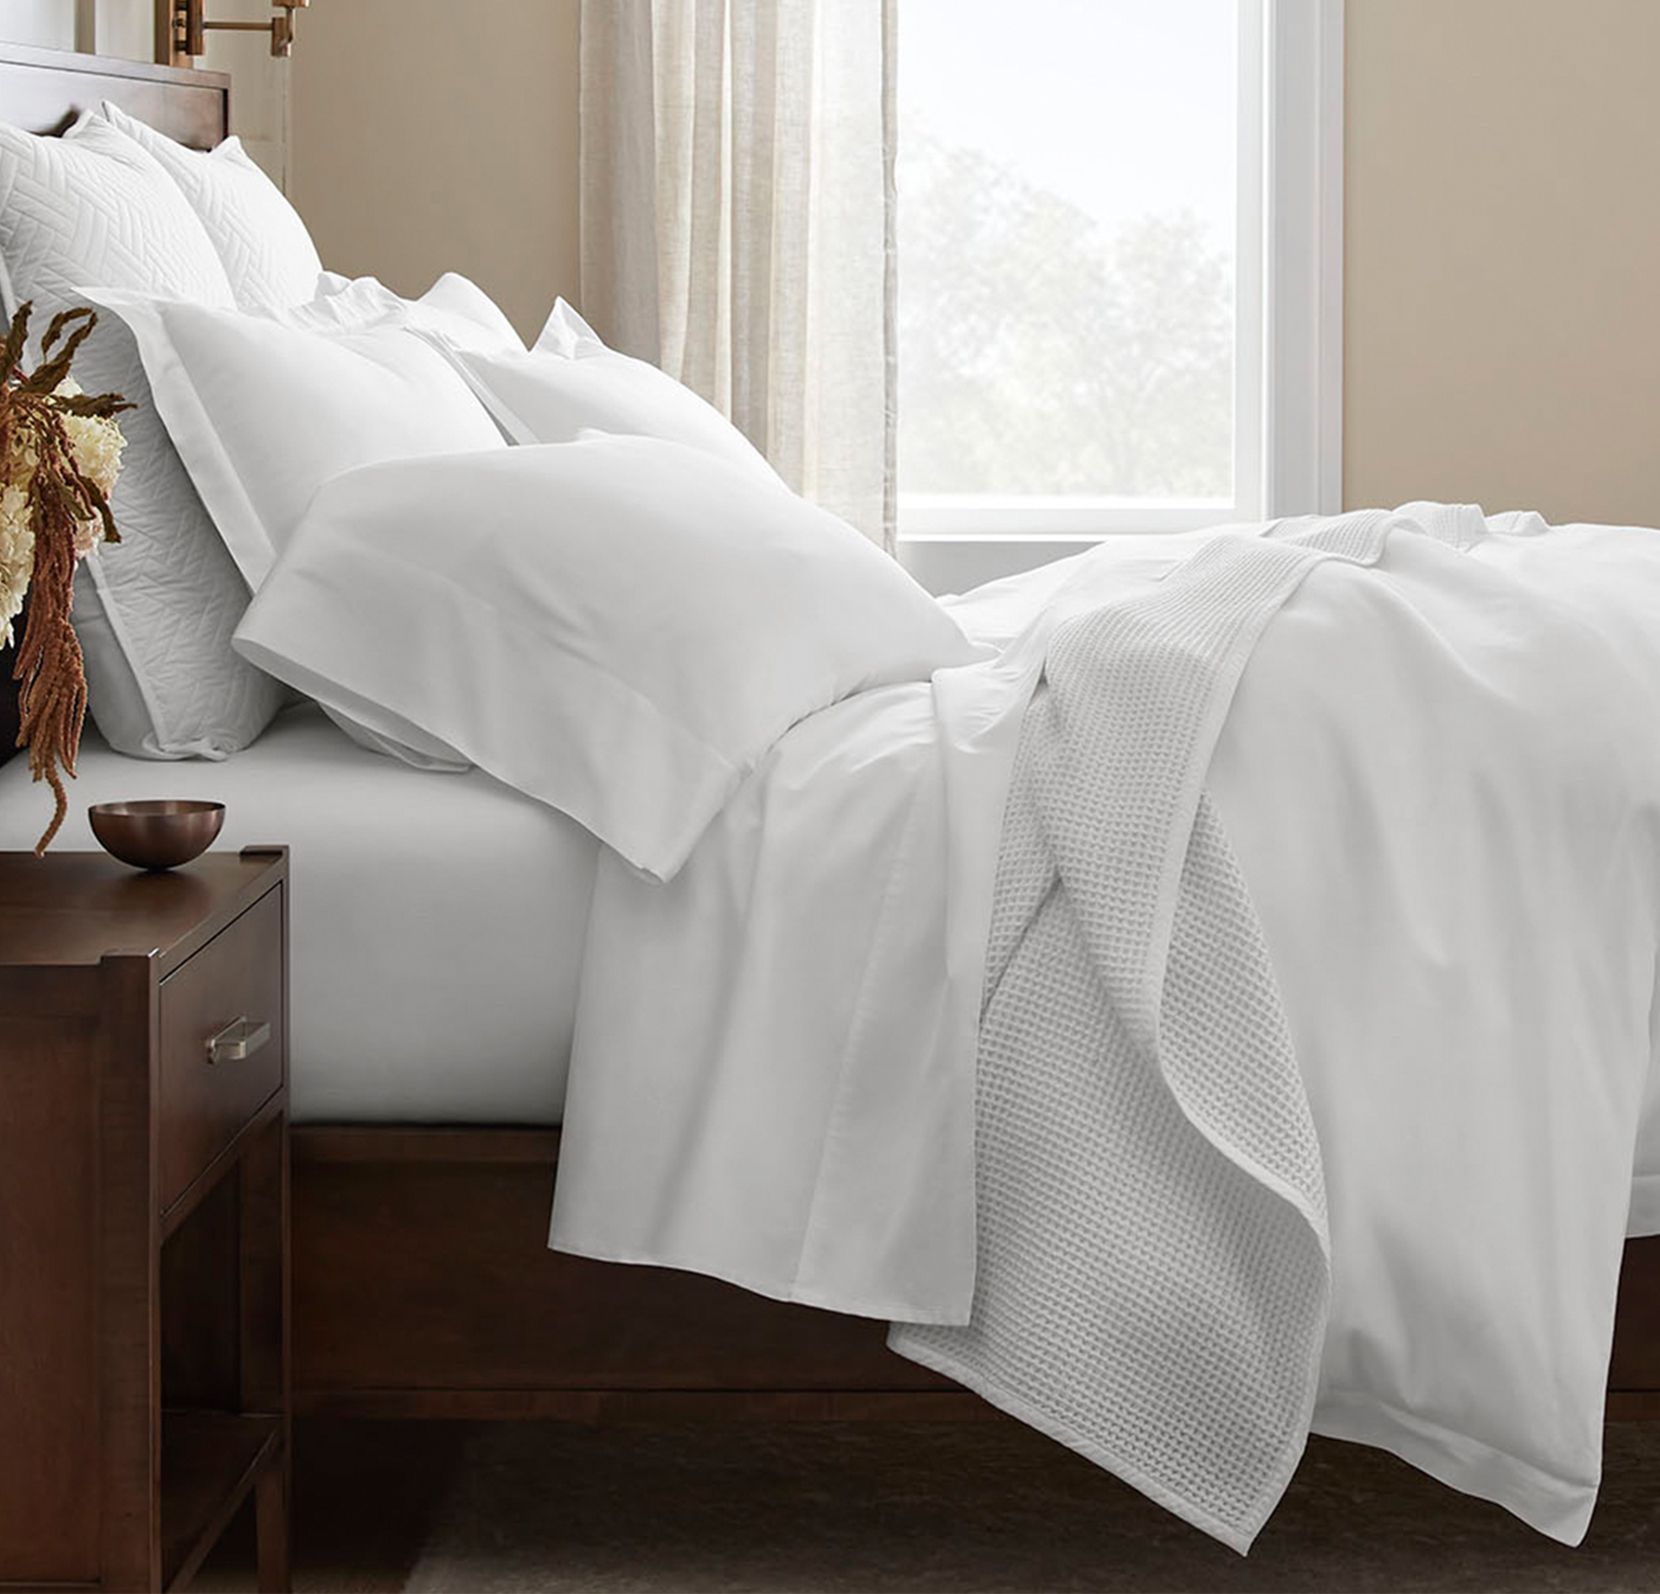 The Complete Signature Bed Bundle | Boll & Branch